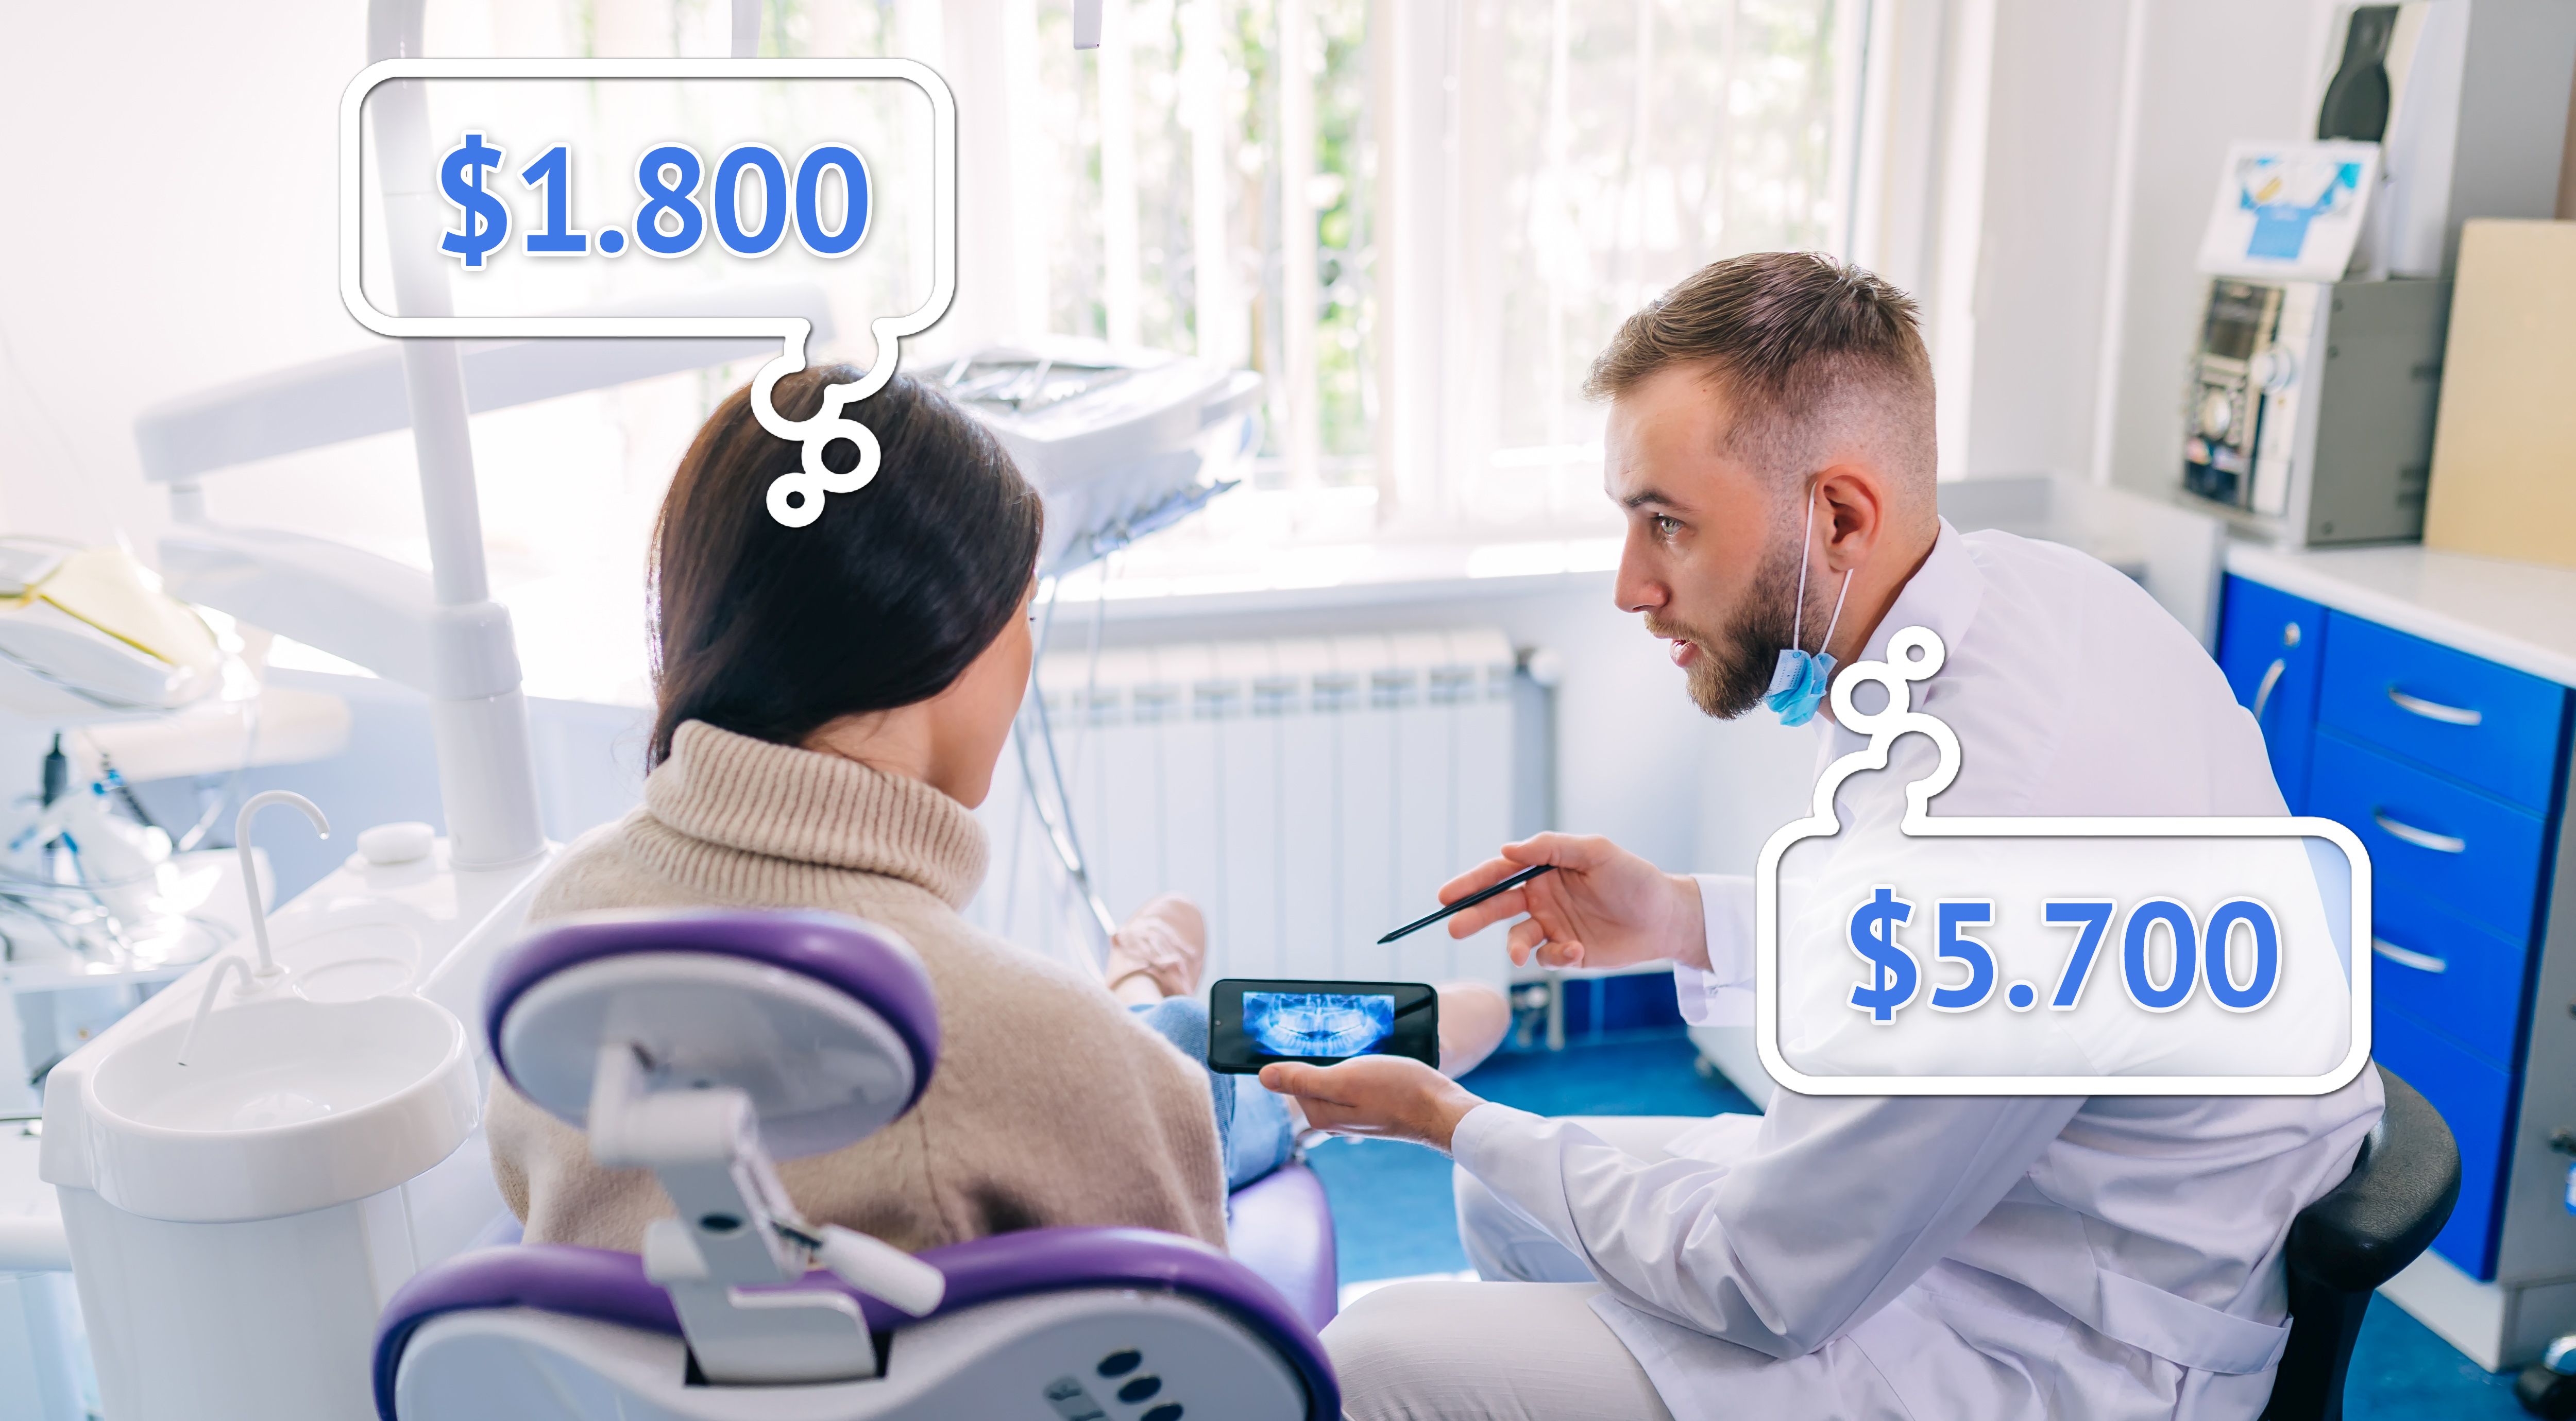 How to communicate dental treatment prices